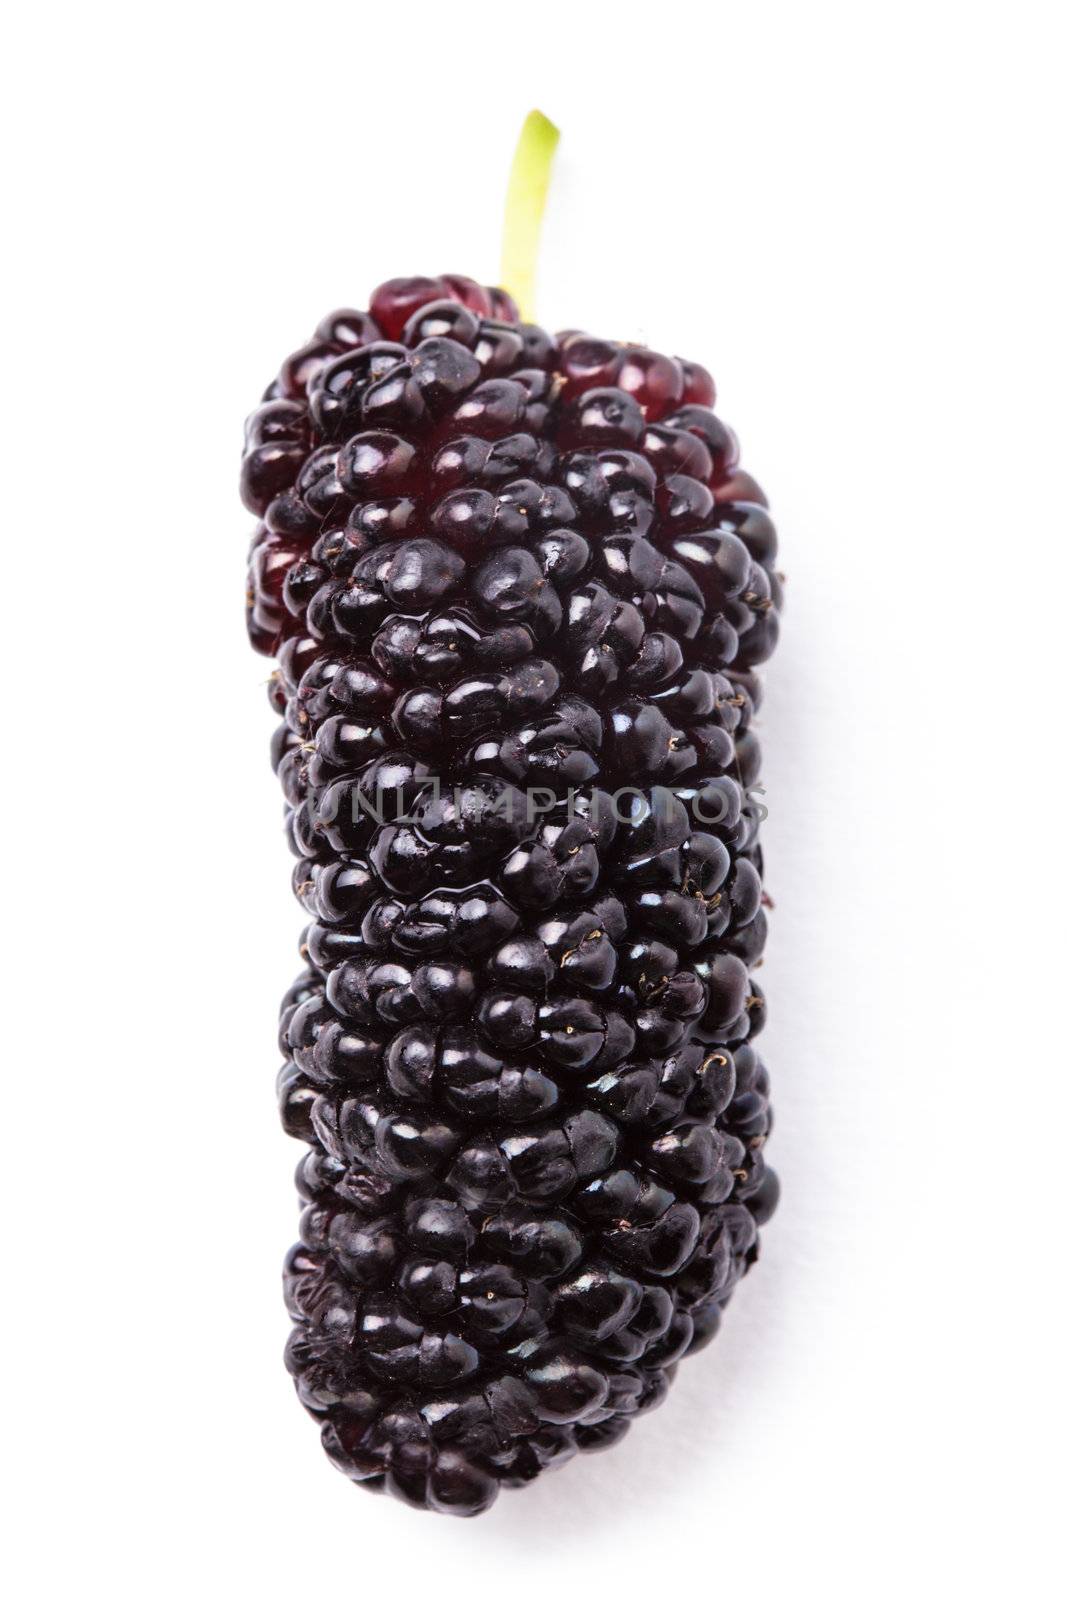 Mulberry berry close up on white background